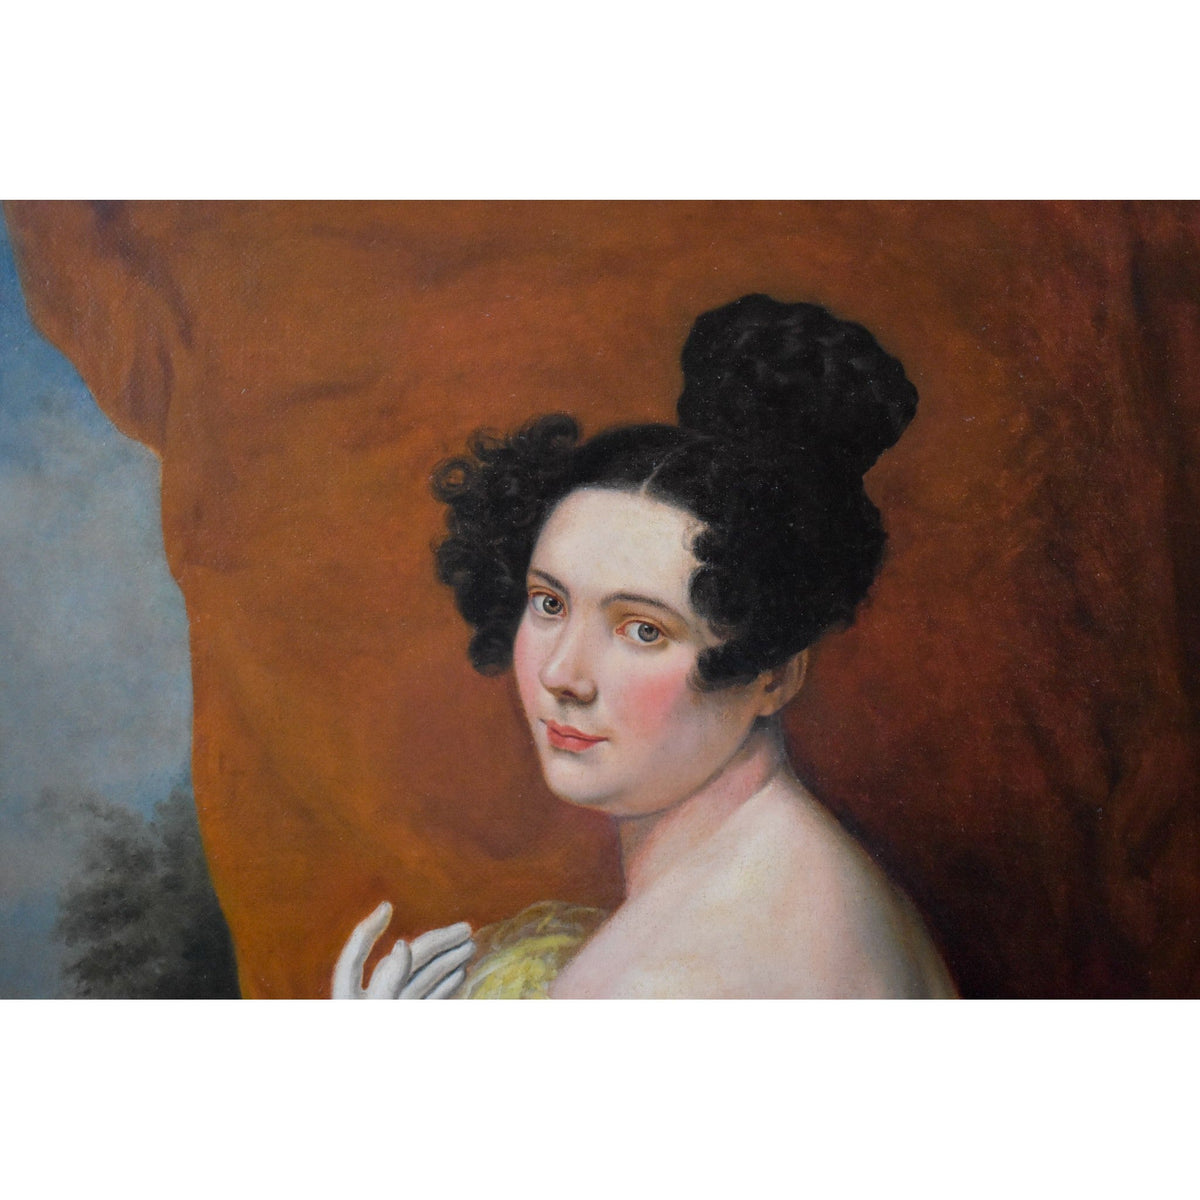 Antique portrait oil painting of a elegant woman French Romantic period original circa 1930 for sale at Winckelmann Gallery